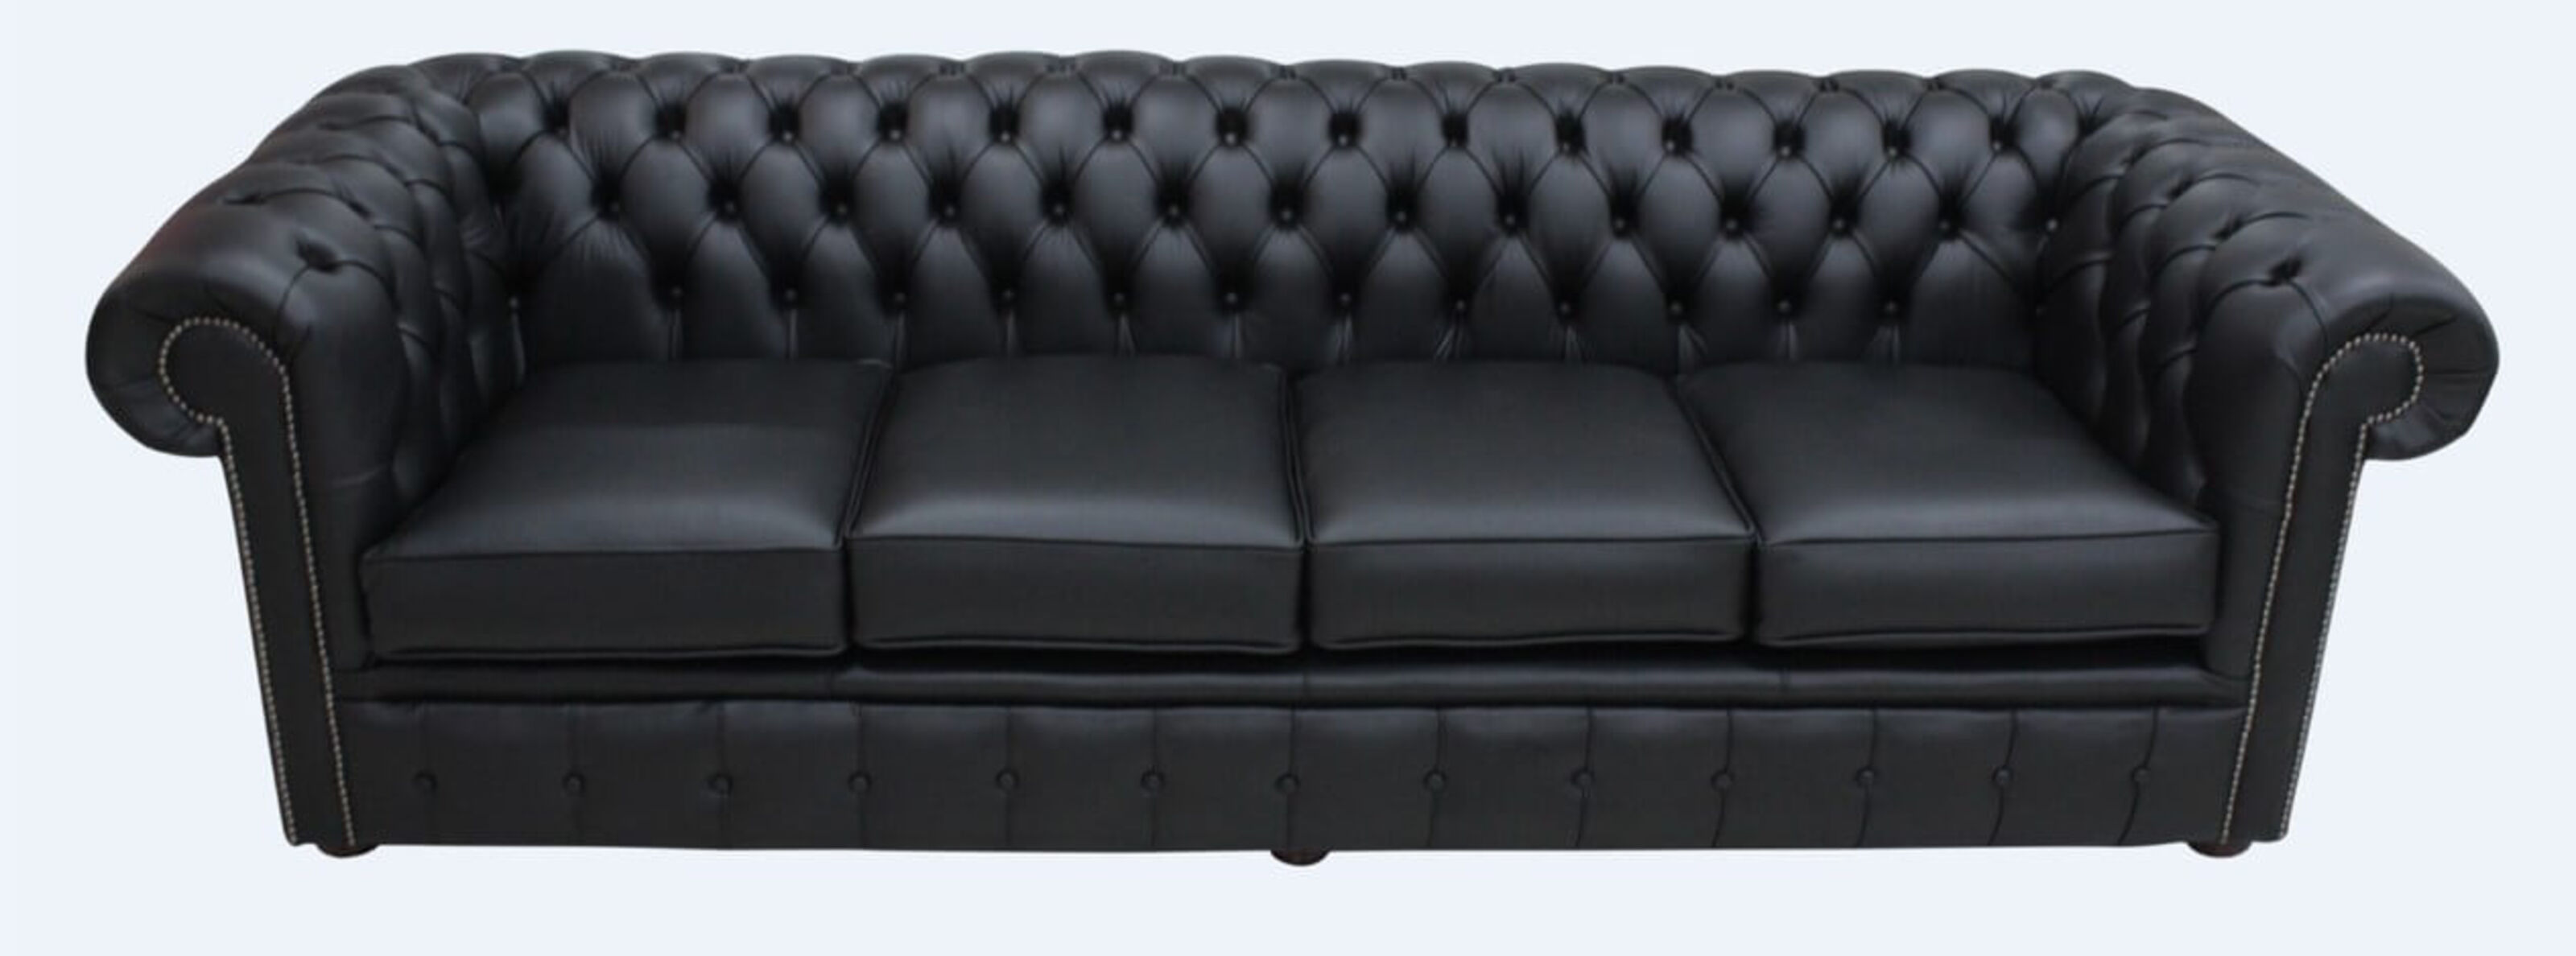 Black Leather Chesterfield Sofa Uk, 4 Seater Leather Sofa